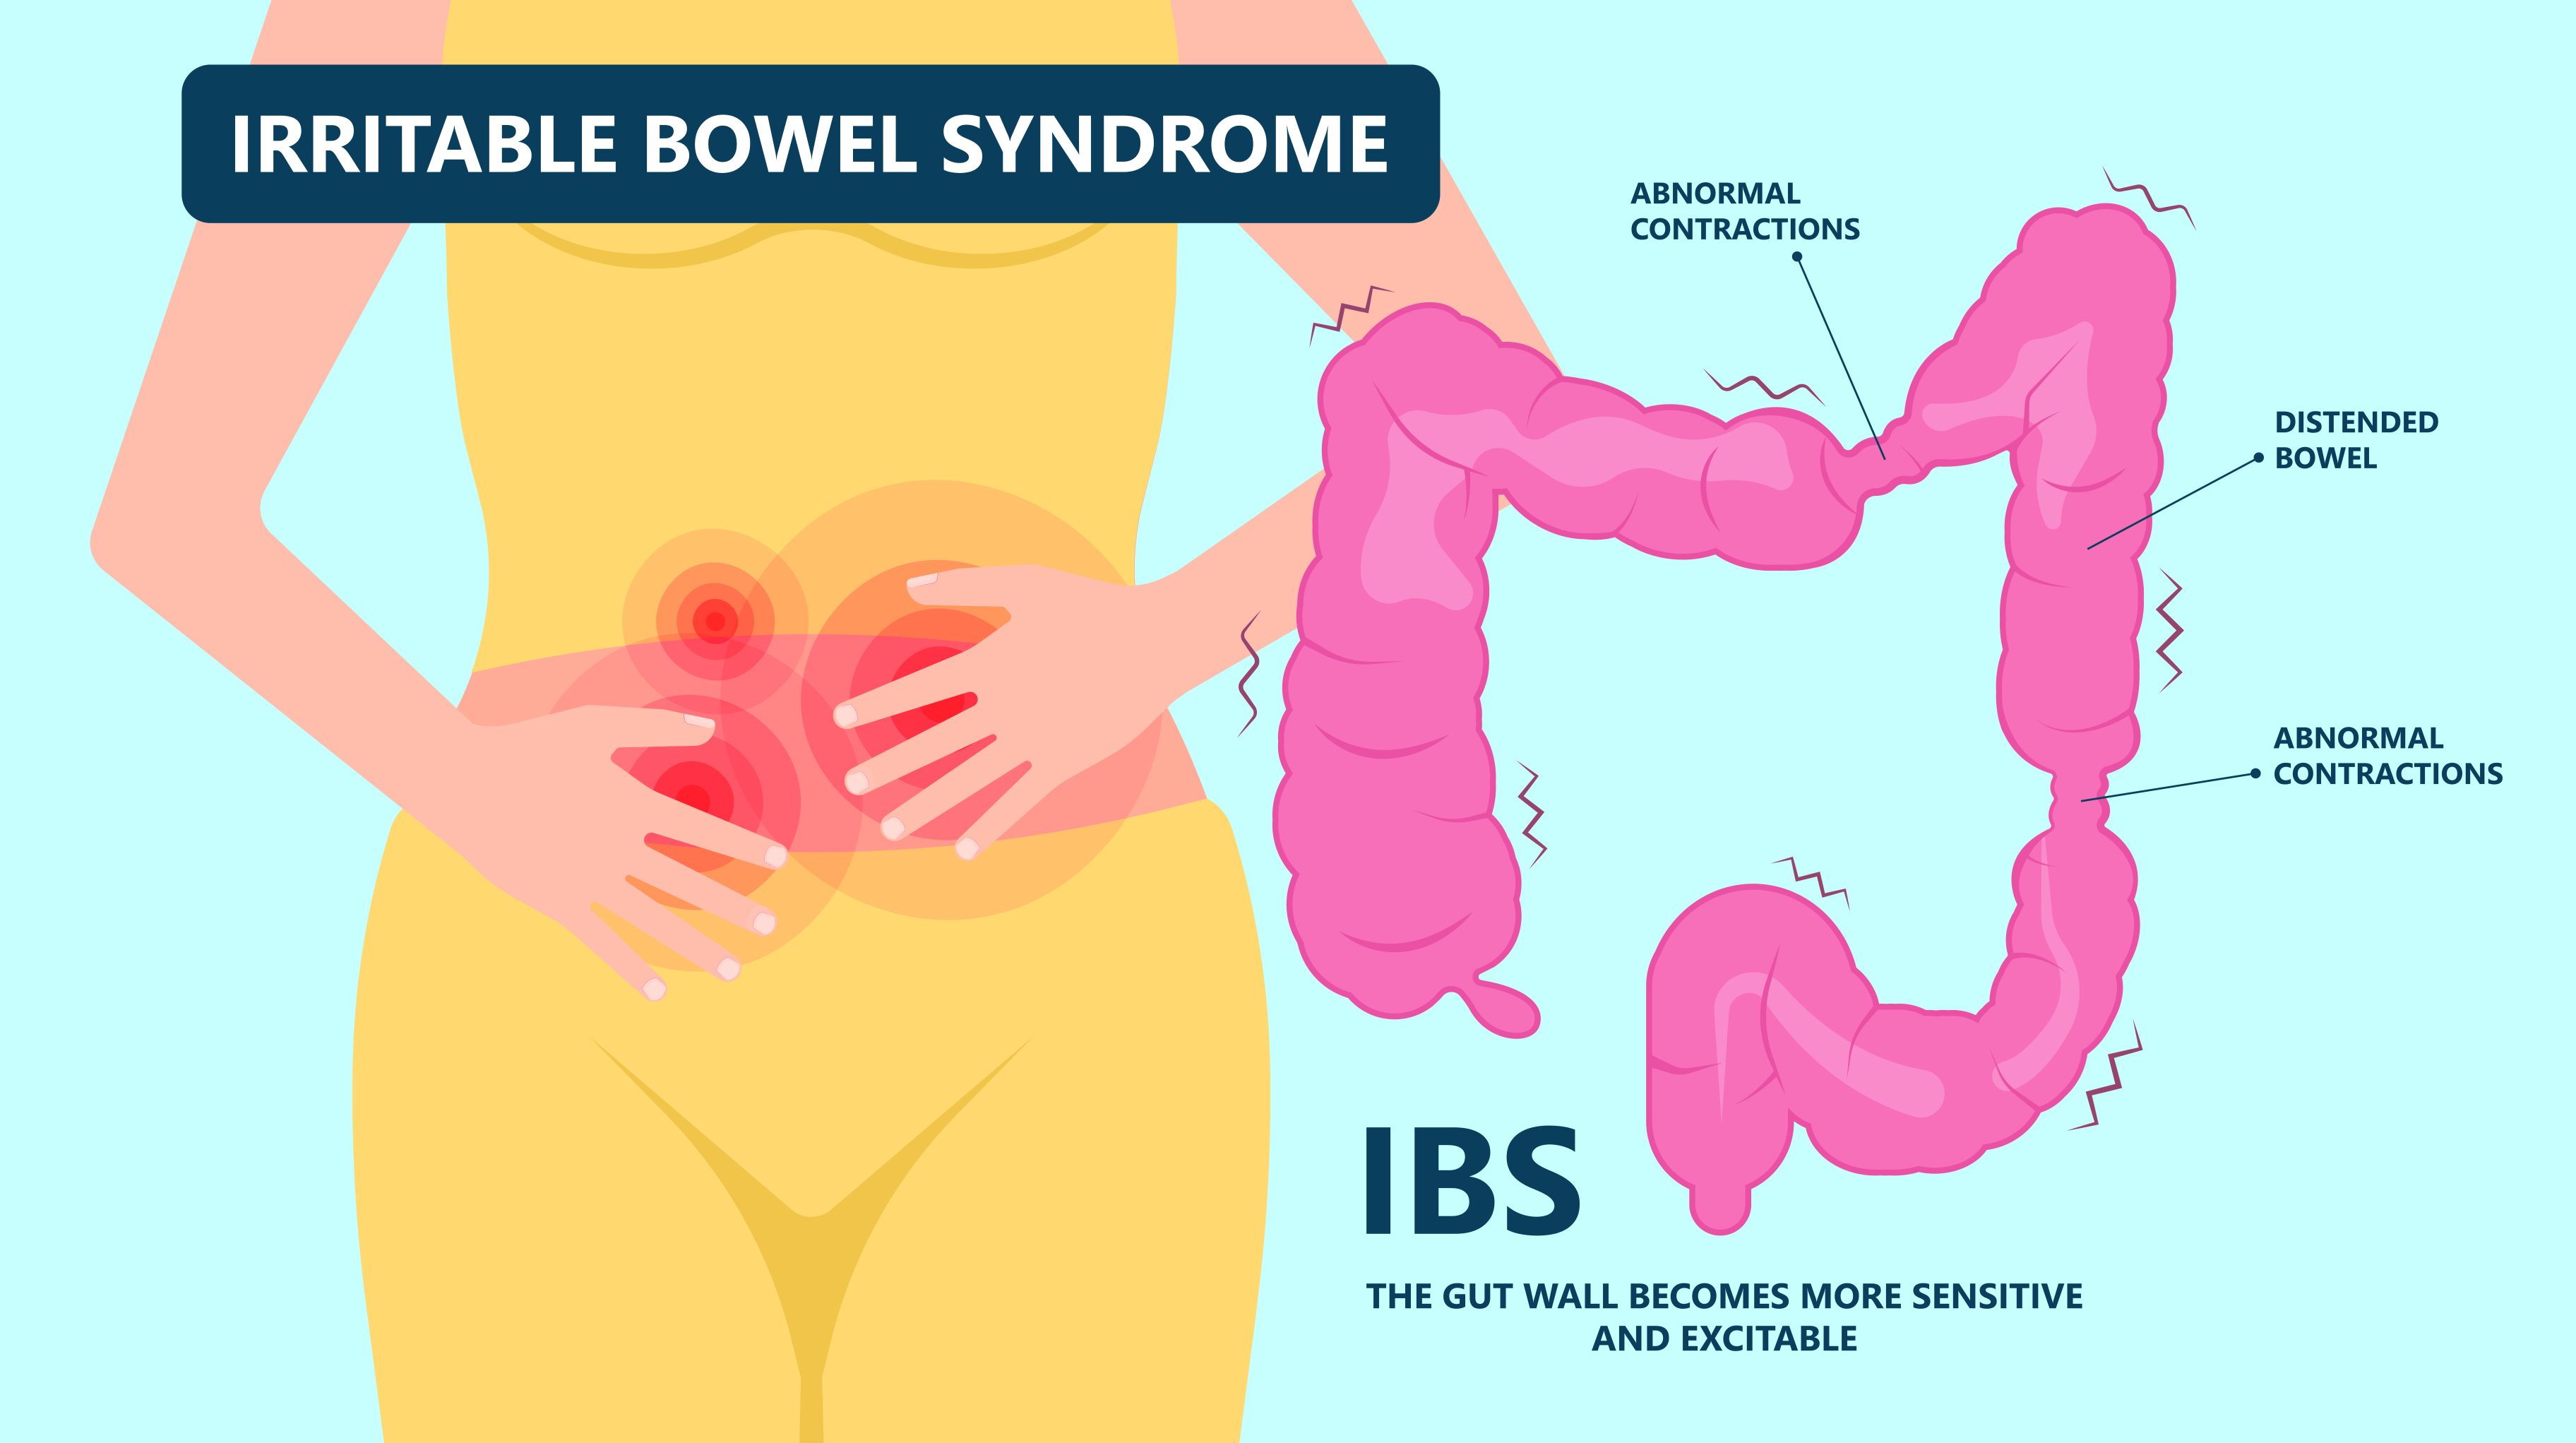 Irritable Bowel Syndrome - The Gut Becomes more Sensitve and Excitable